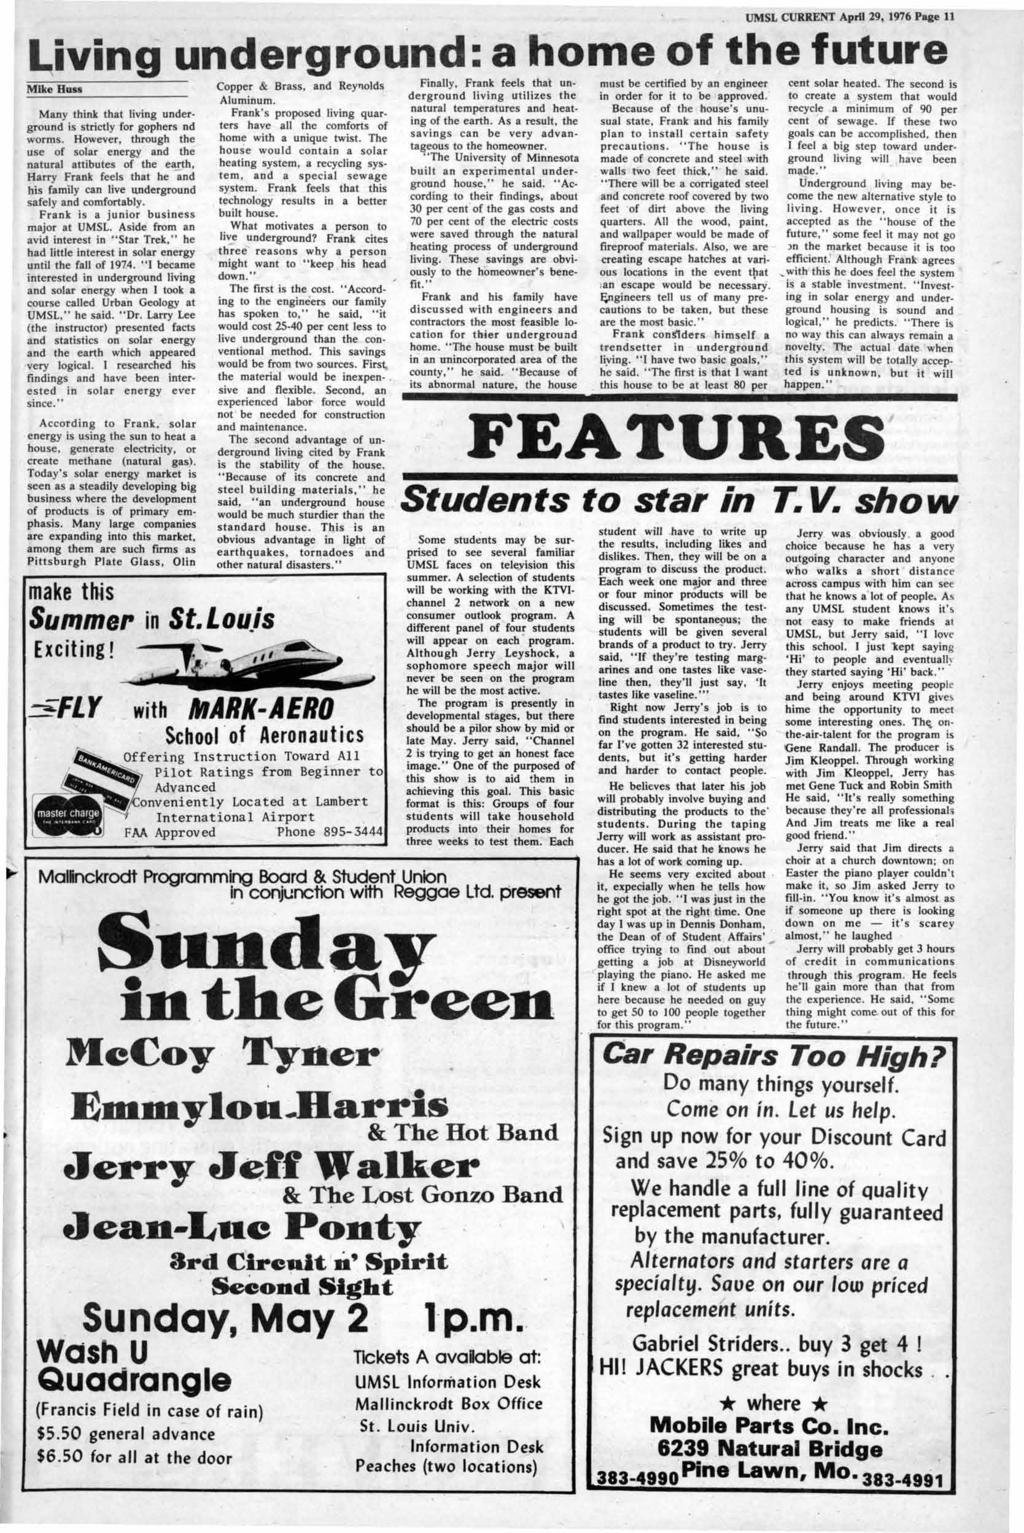 UMSL CURRENT April 29, 1976 Page 11 Living underground: a home of the future Mike BU88 Many think that living underground is strictly for gophers nd worms.